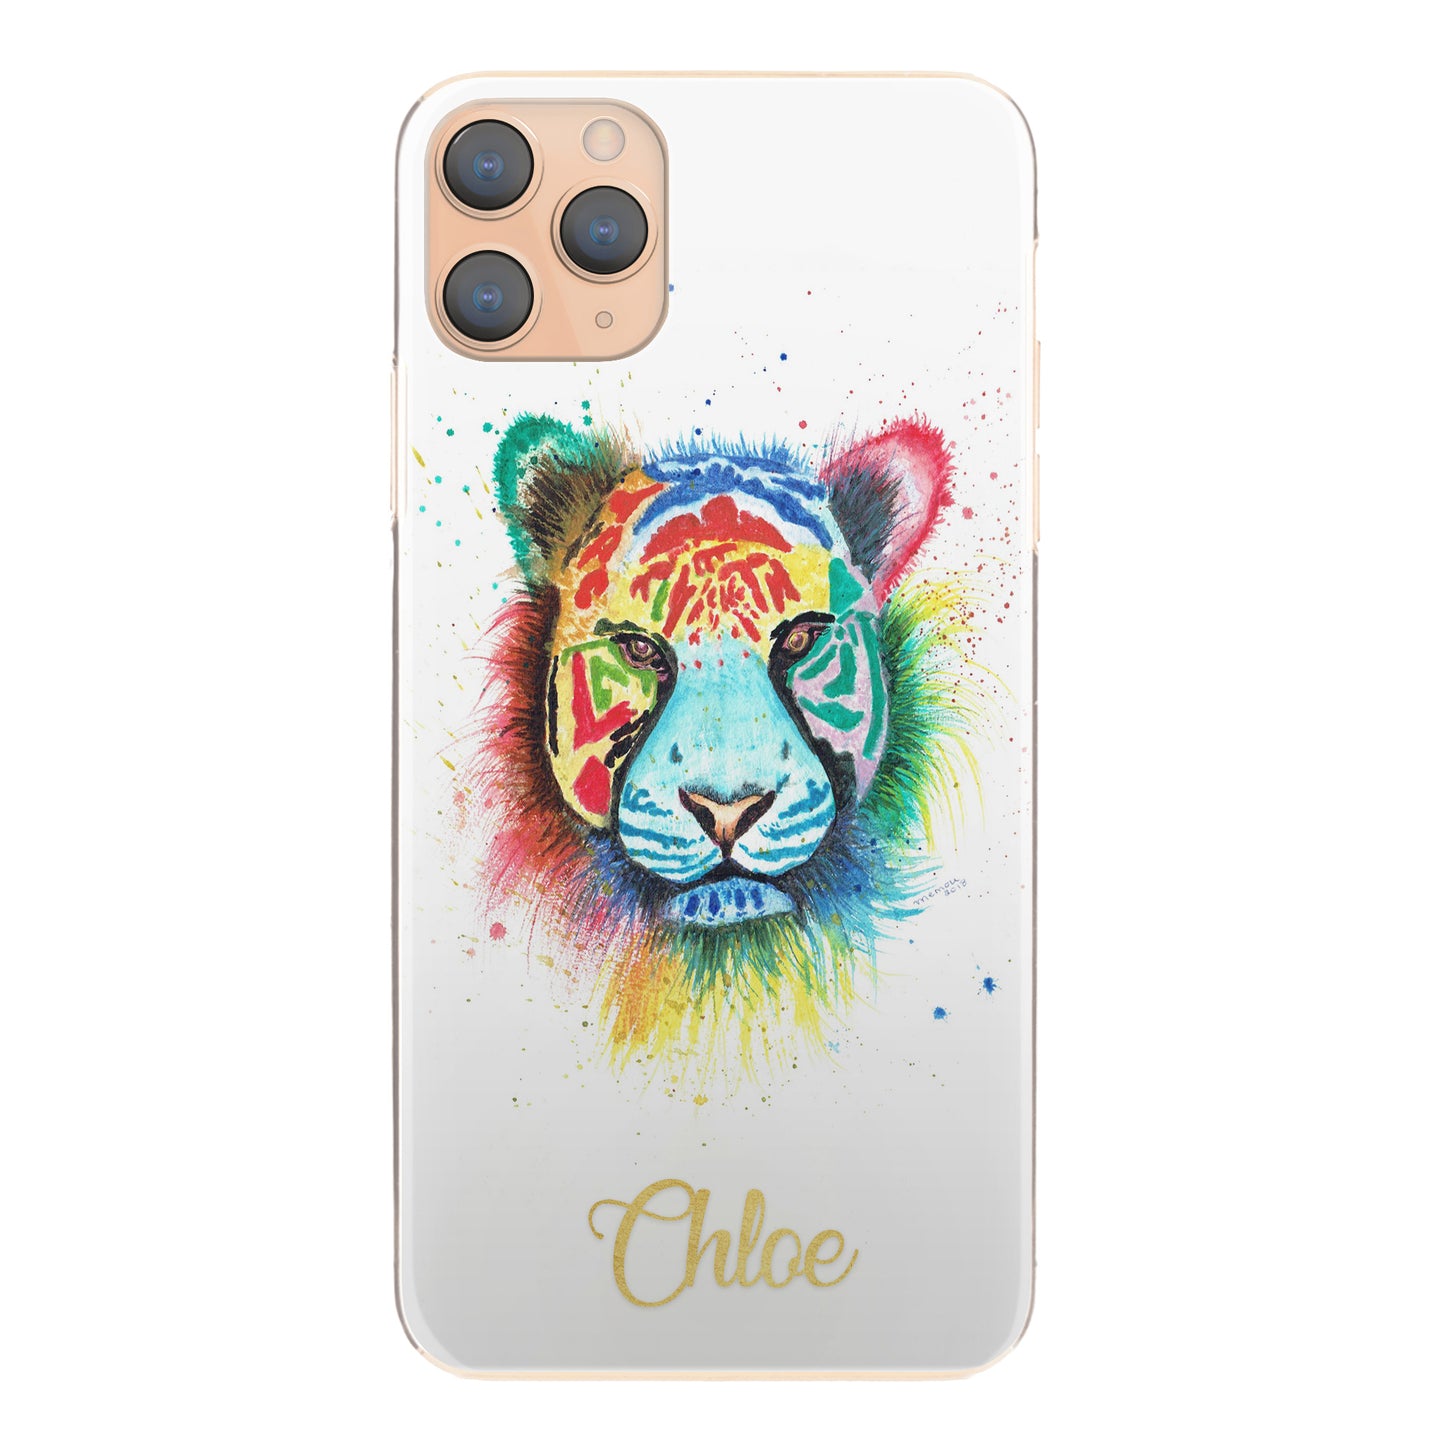 Personalised Samsung Galaxy Phone Hard Case with Rainbow Tiger and Gold Text